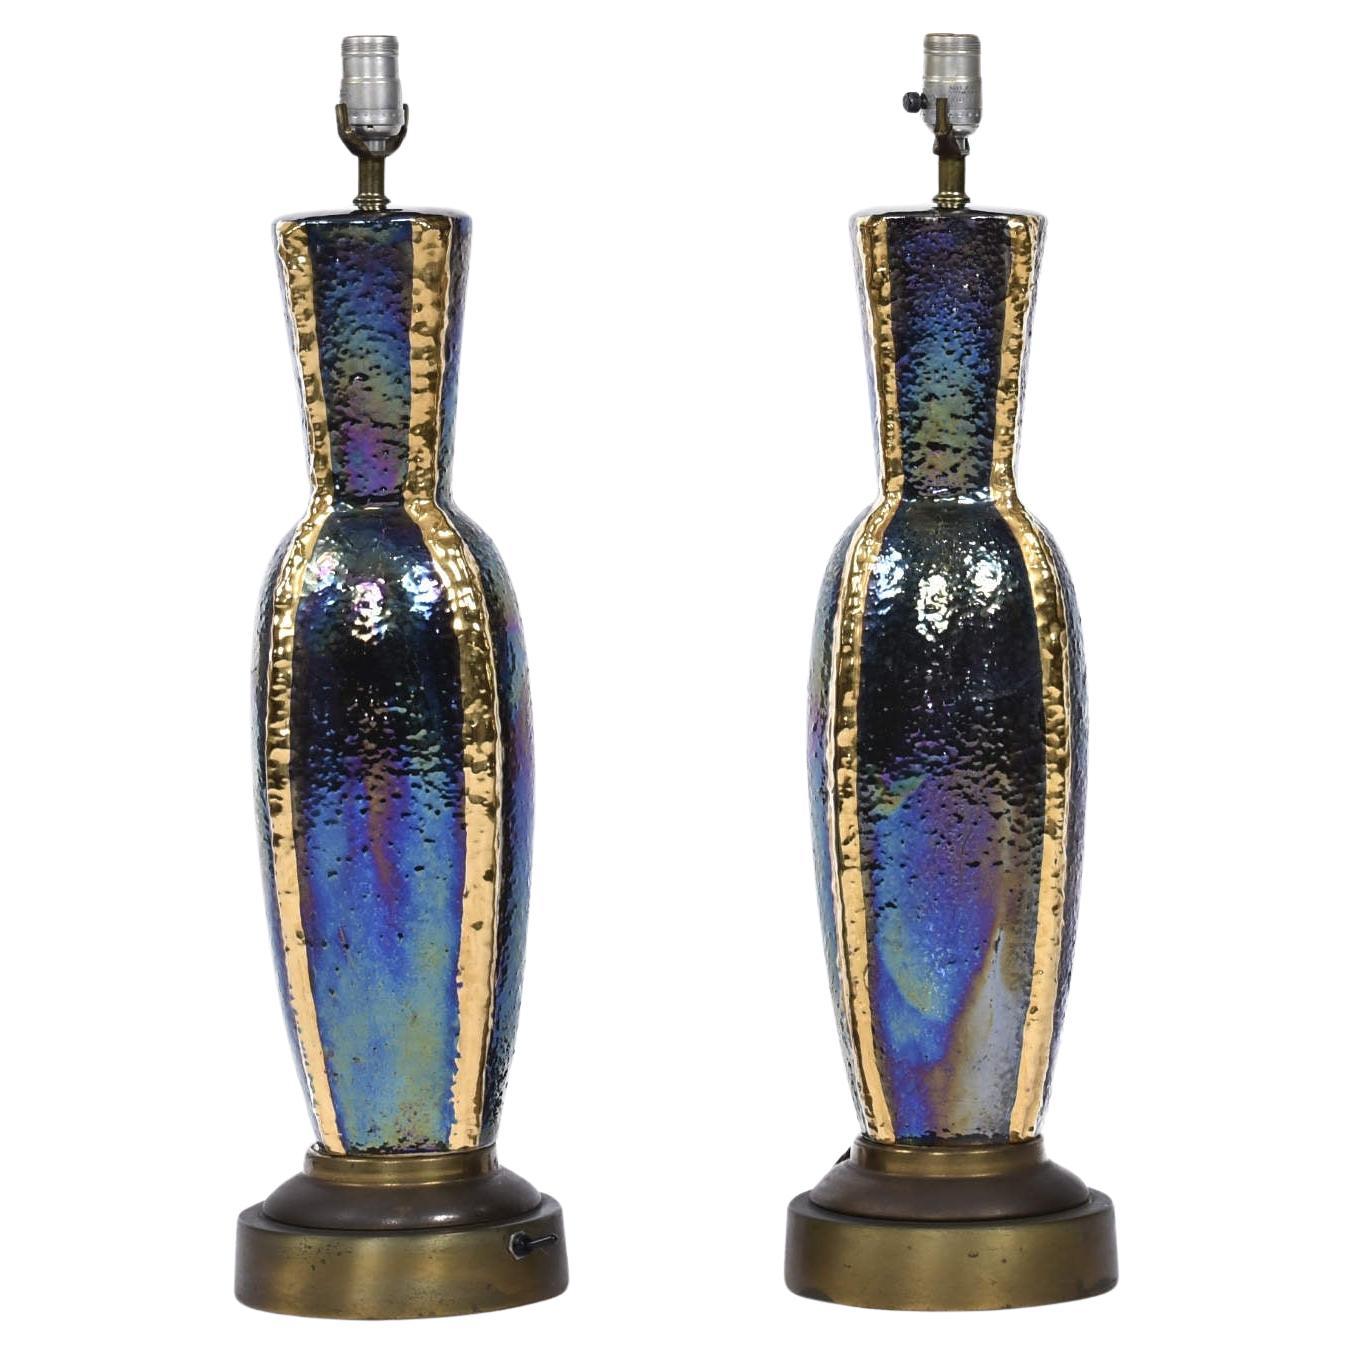 Pair of Iridescent Blue and Gold Mid-Century Modern Urn Shaped Ceramic Lamps For Sale